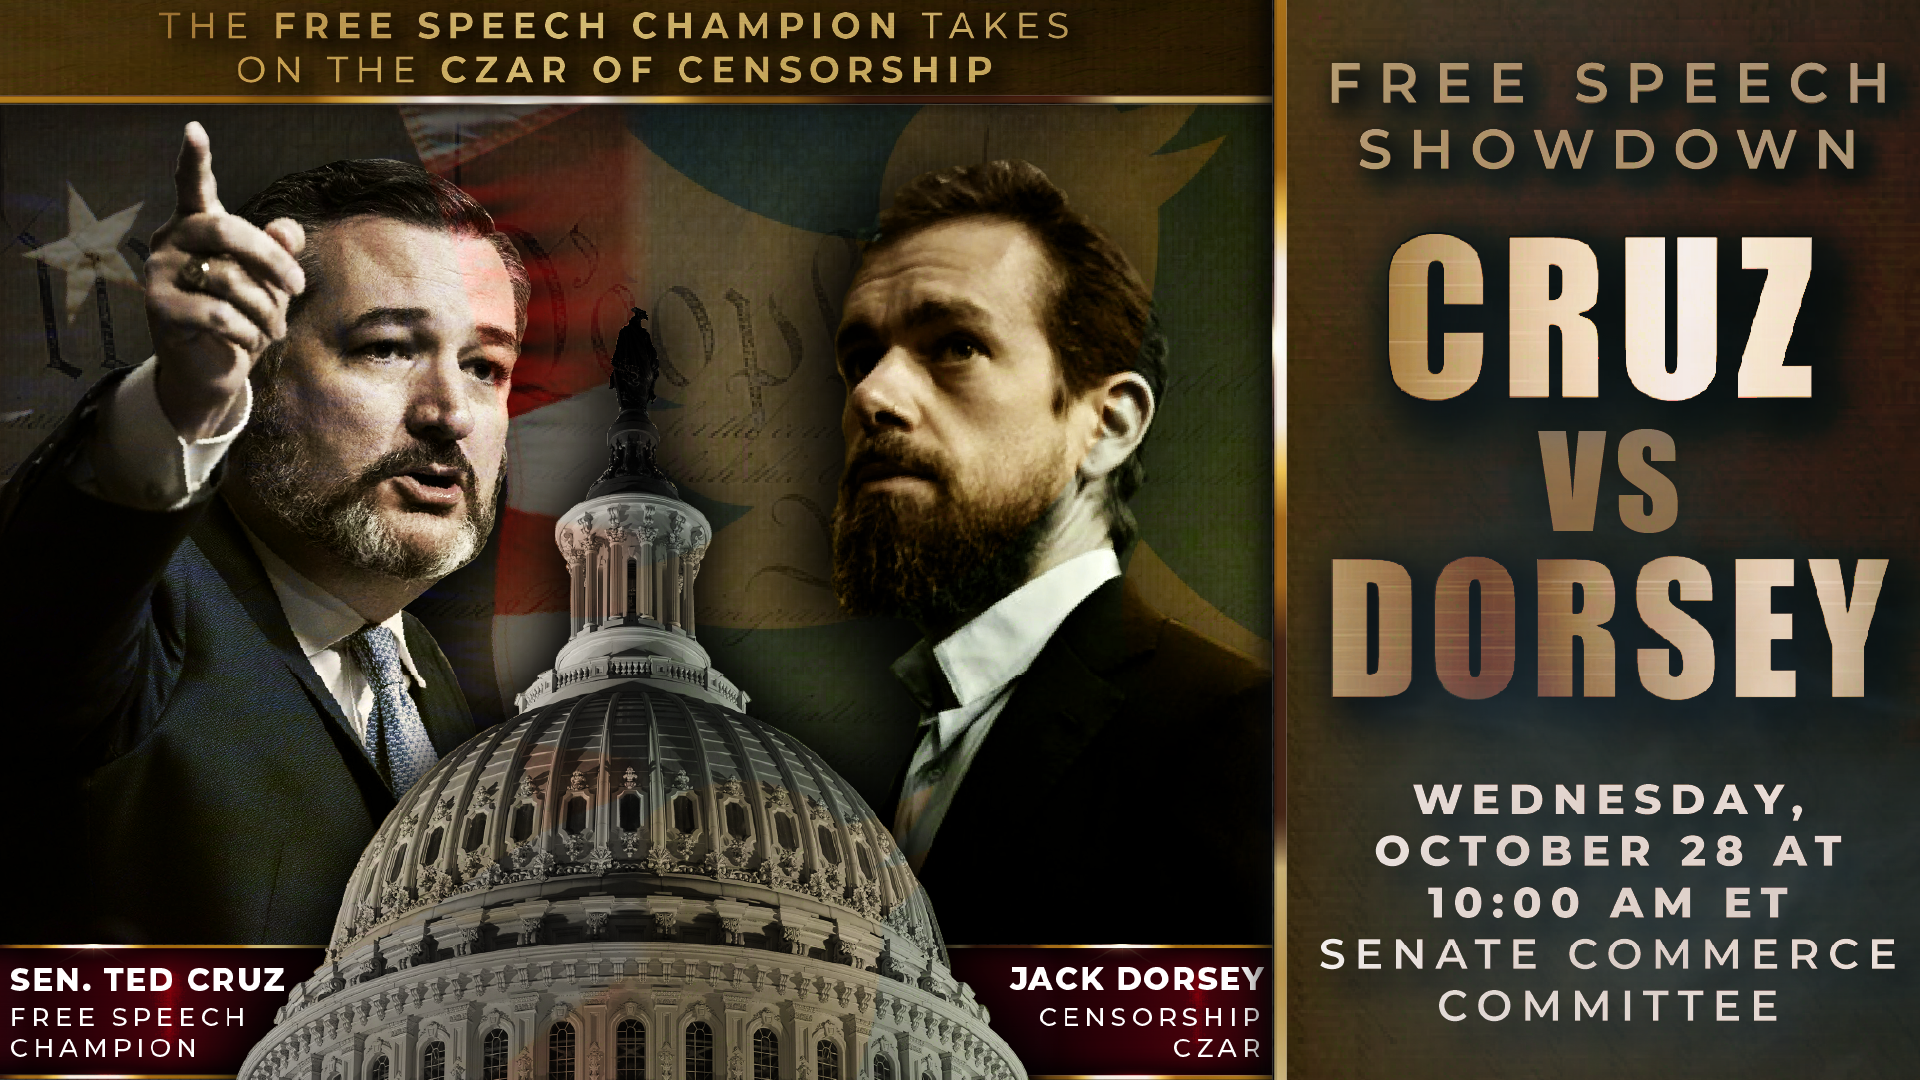 Card advertising a Senate Commerce Committee Hearing as a "FREE SPEECH SHOWDOWN" labeling Sen. Ted Cruz as "THE FREE SPEECH CHAMPION" and Twitter CEO Jack Dorsey as "THE CZAR OF CENSORSHIP."